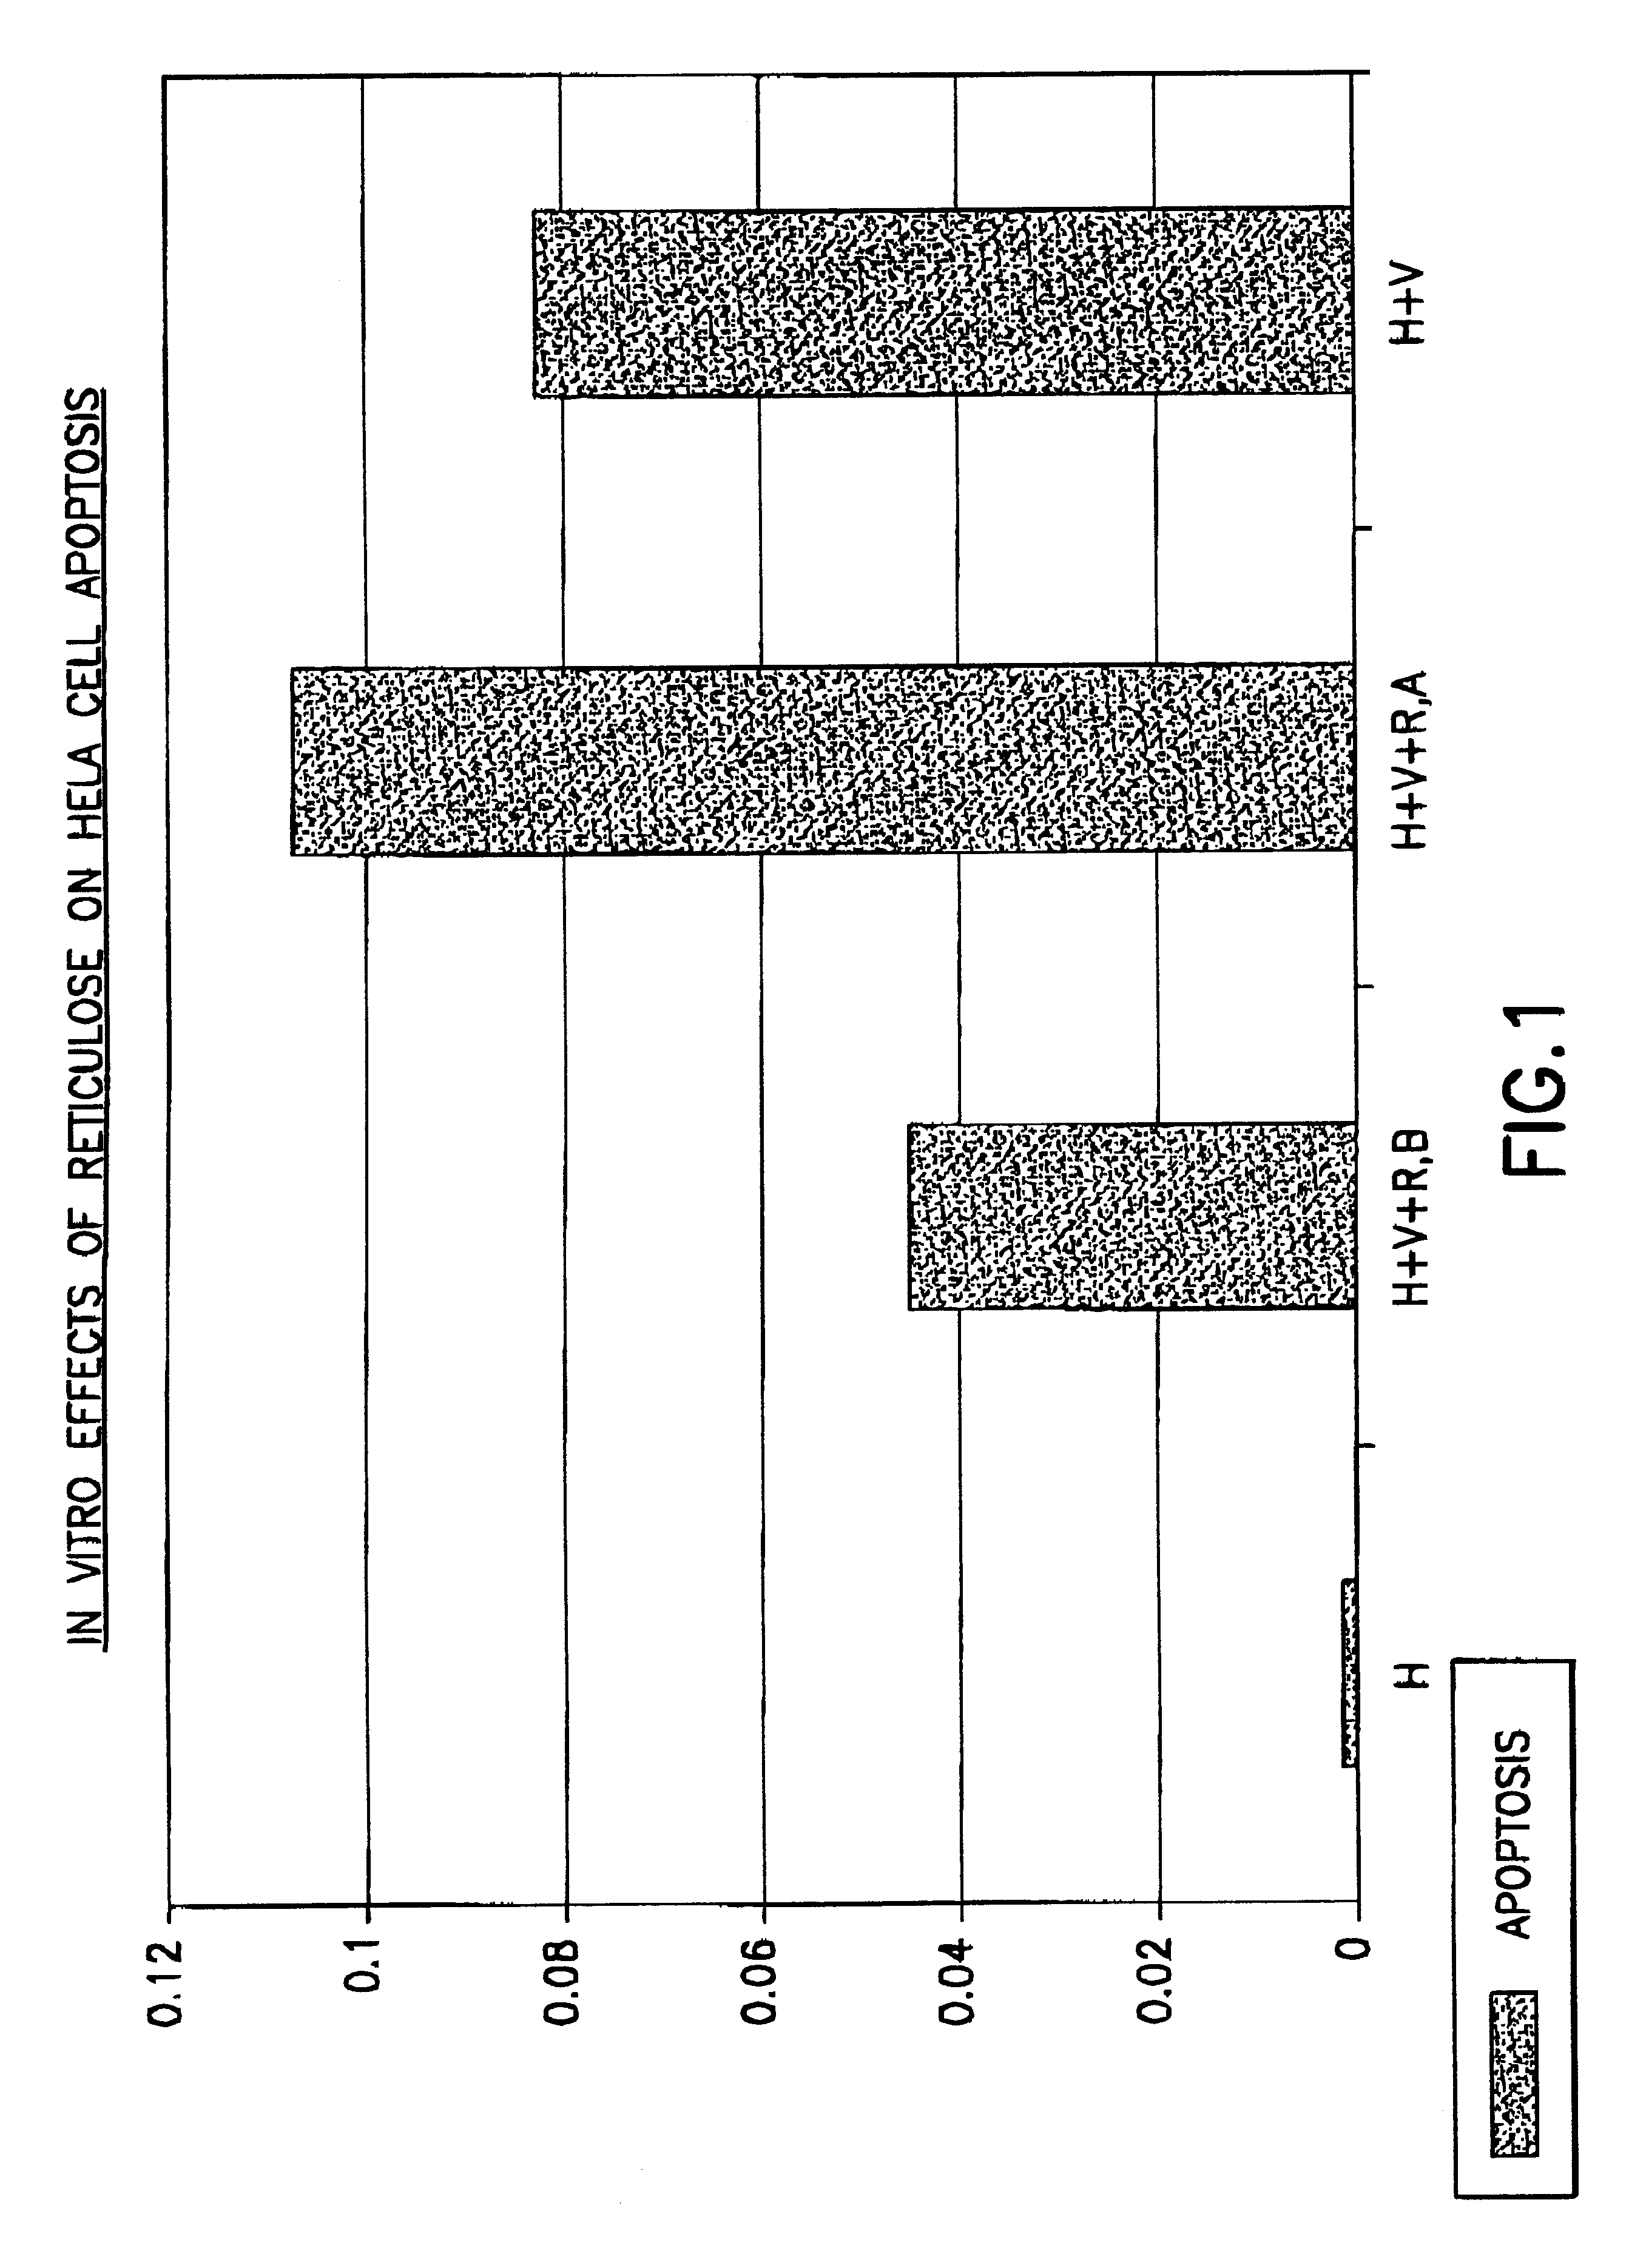 Assay method for determining Product R's effect on adenovirus infection of Hela cells